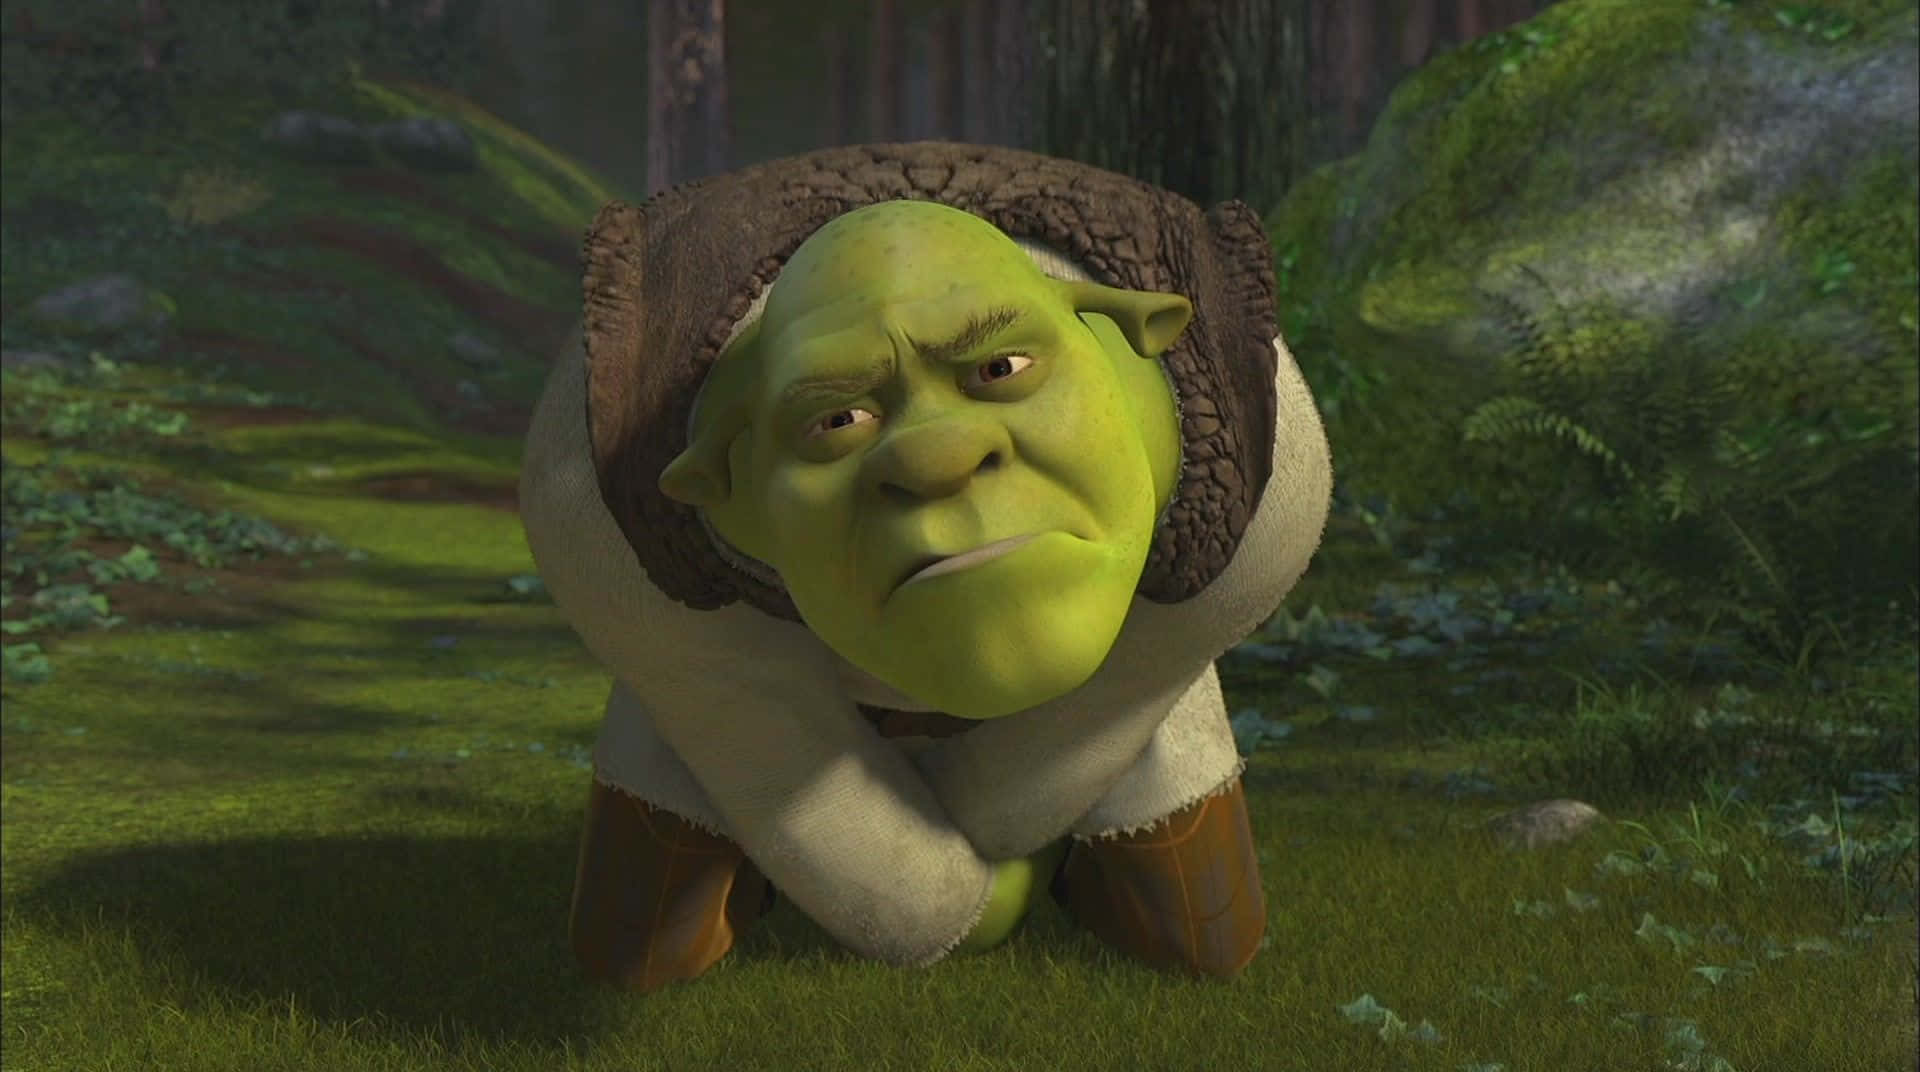 "A funny look from Shrek!"